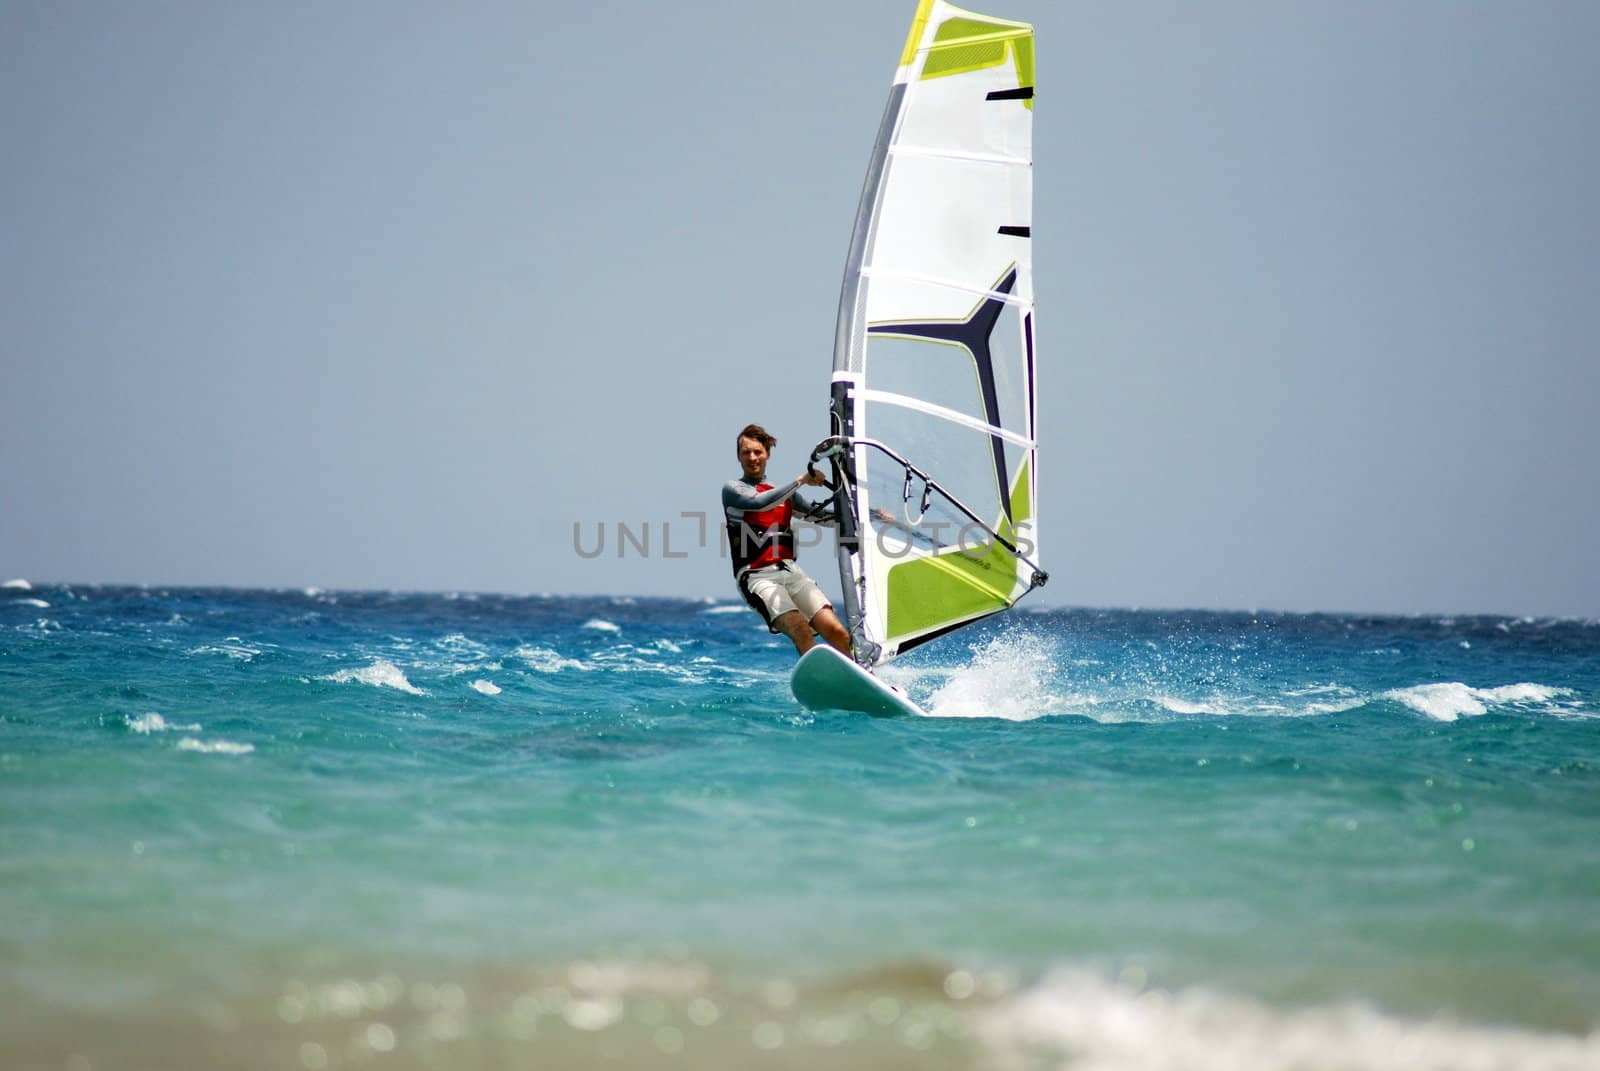 windsurfing  on the move  by svtrotof